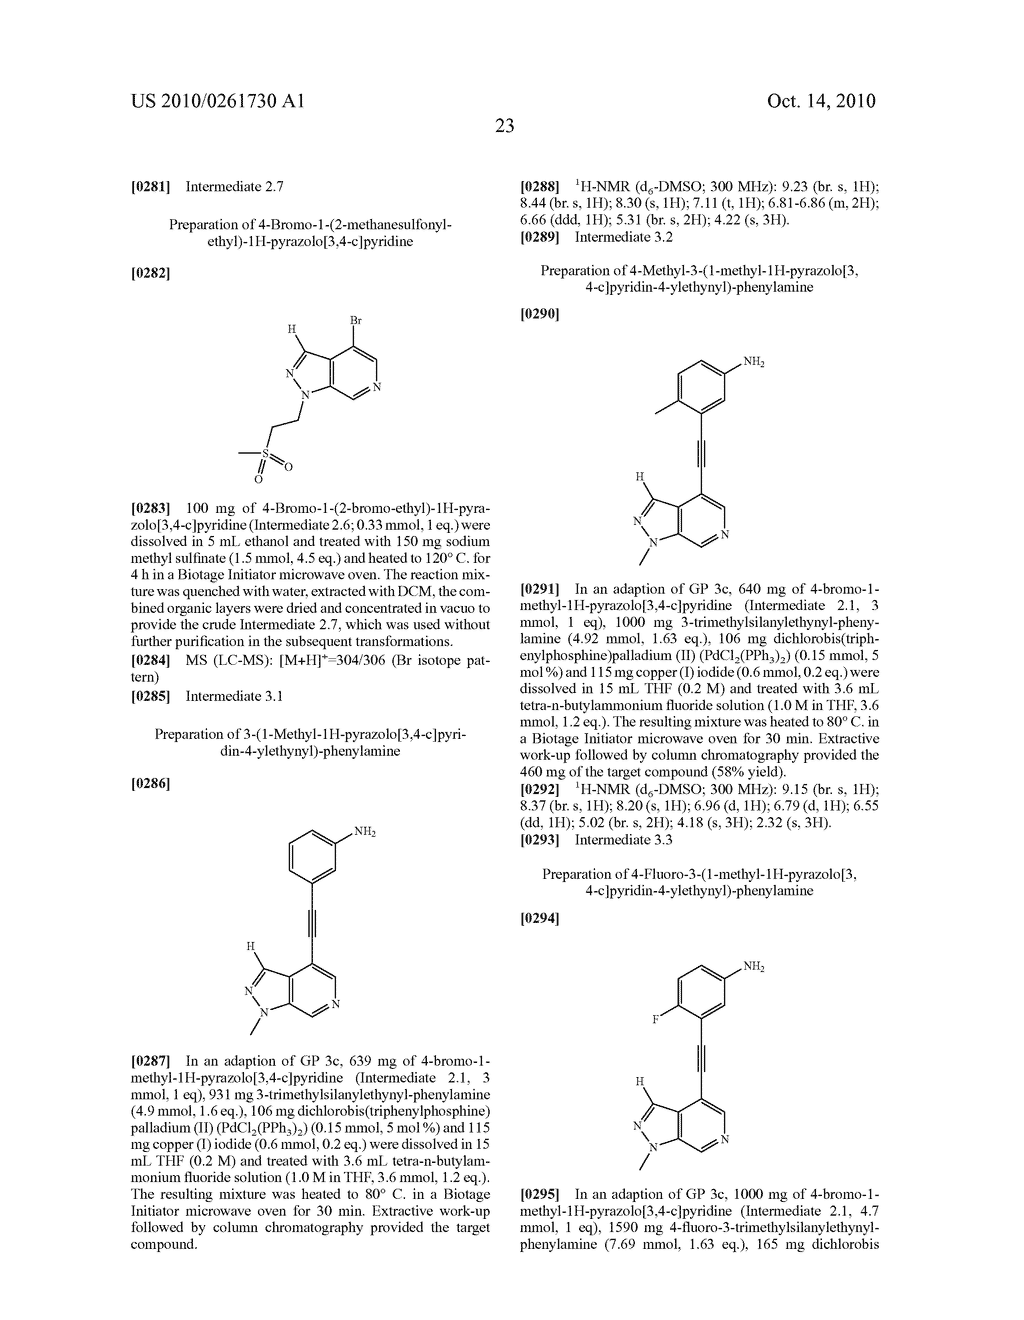 ALKYNYLARYL COMPOUNDS AND SALTS THEREOF, PHARMACEUTICAL COMPOSITIONS COMPRISING SAME, METHODS OF PREPARING SAME AND USES OF SAME - diagram, schematic, and image 24